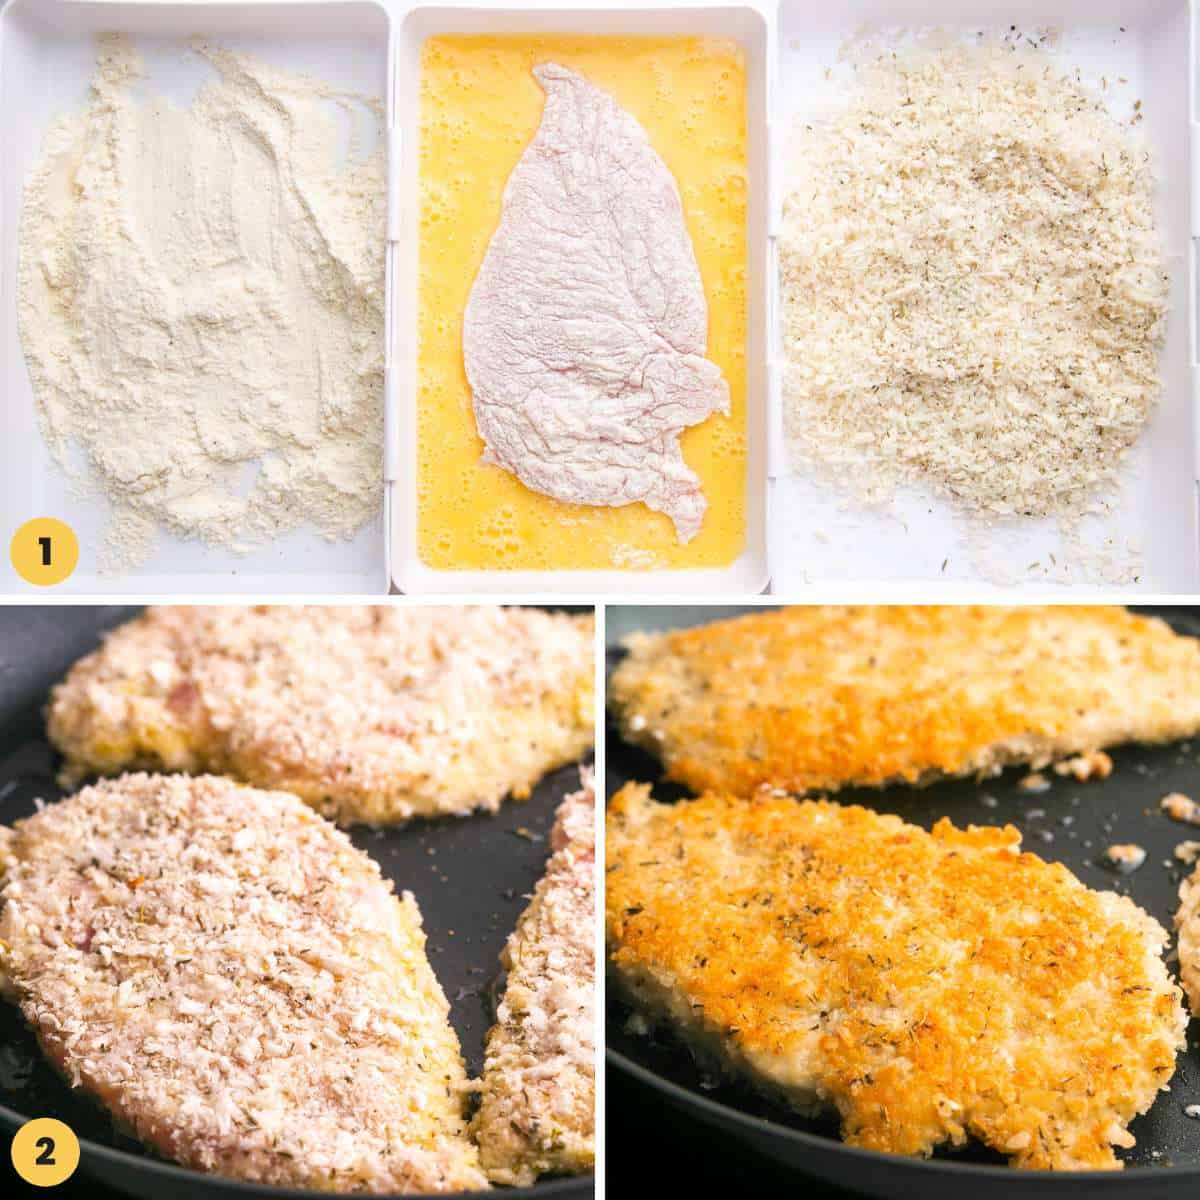 A collage of 3 images showing how to set up a breading station, bread chicken cutlets, and fry chicken cutlets.